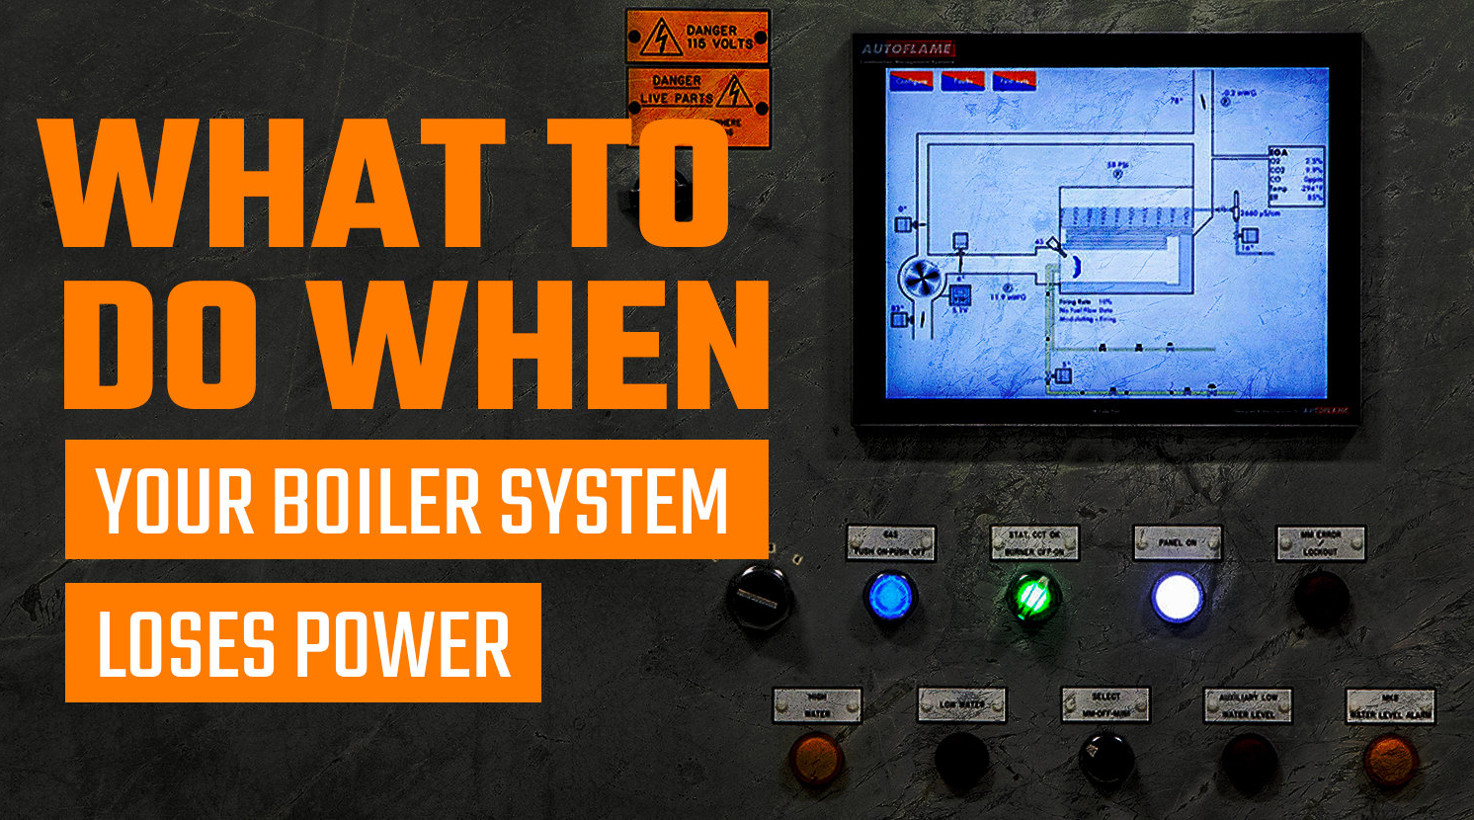 What to Do When Your Boiler System Loses Power